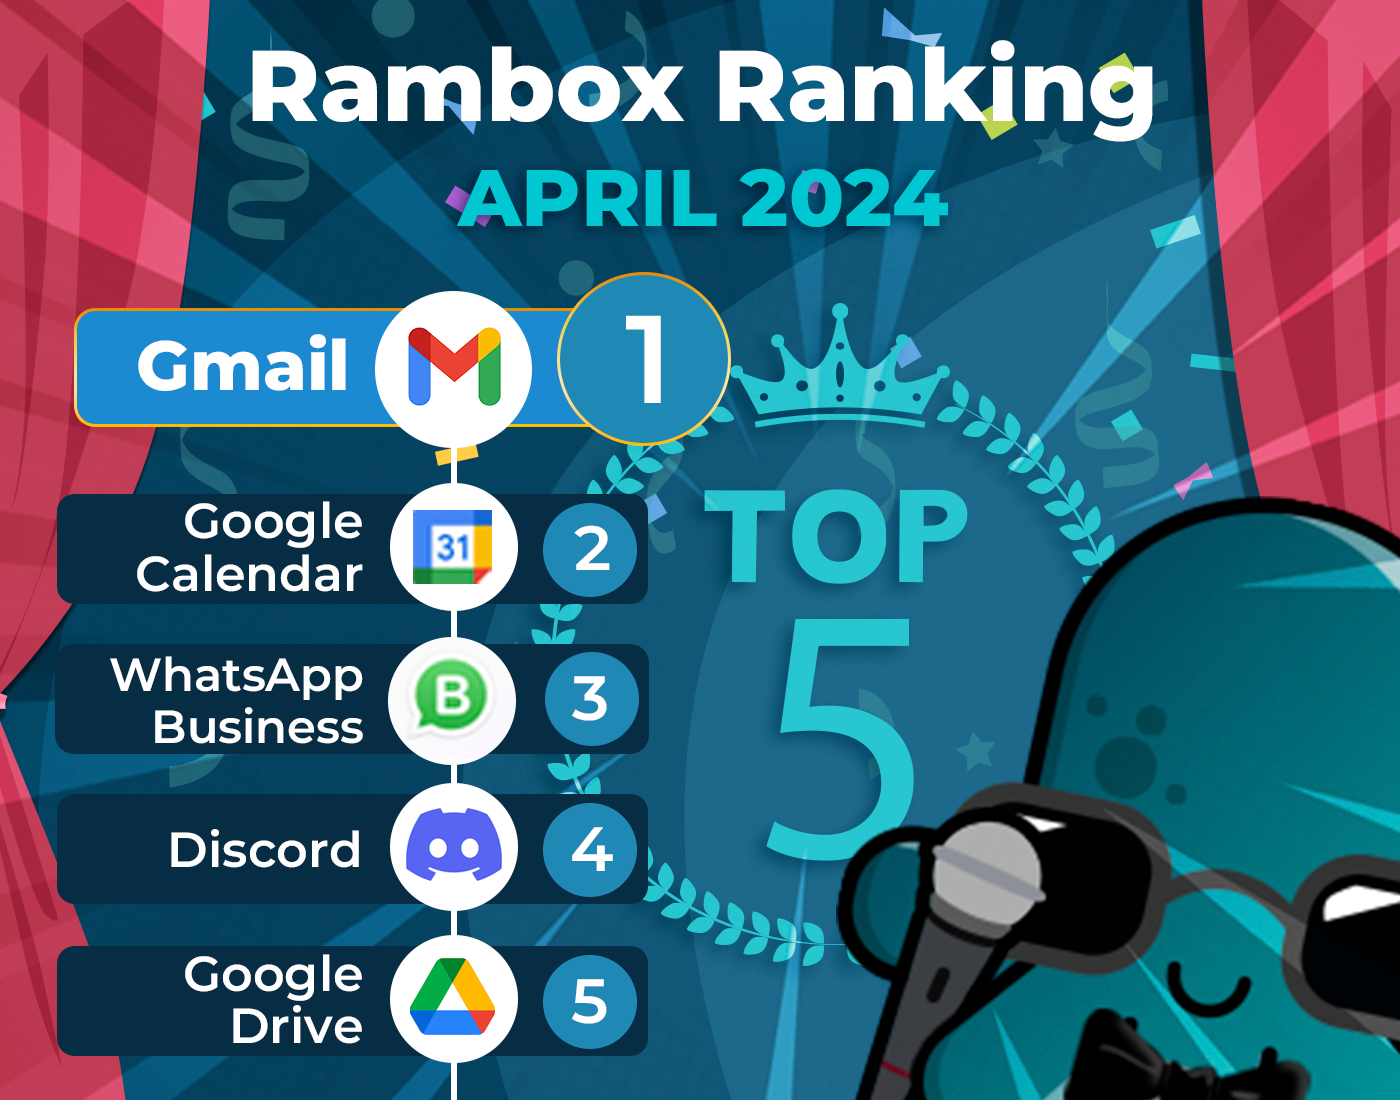 April’s most-used apps on Rambox